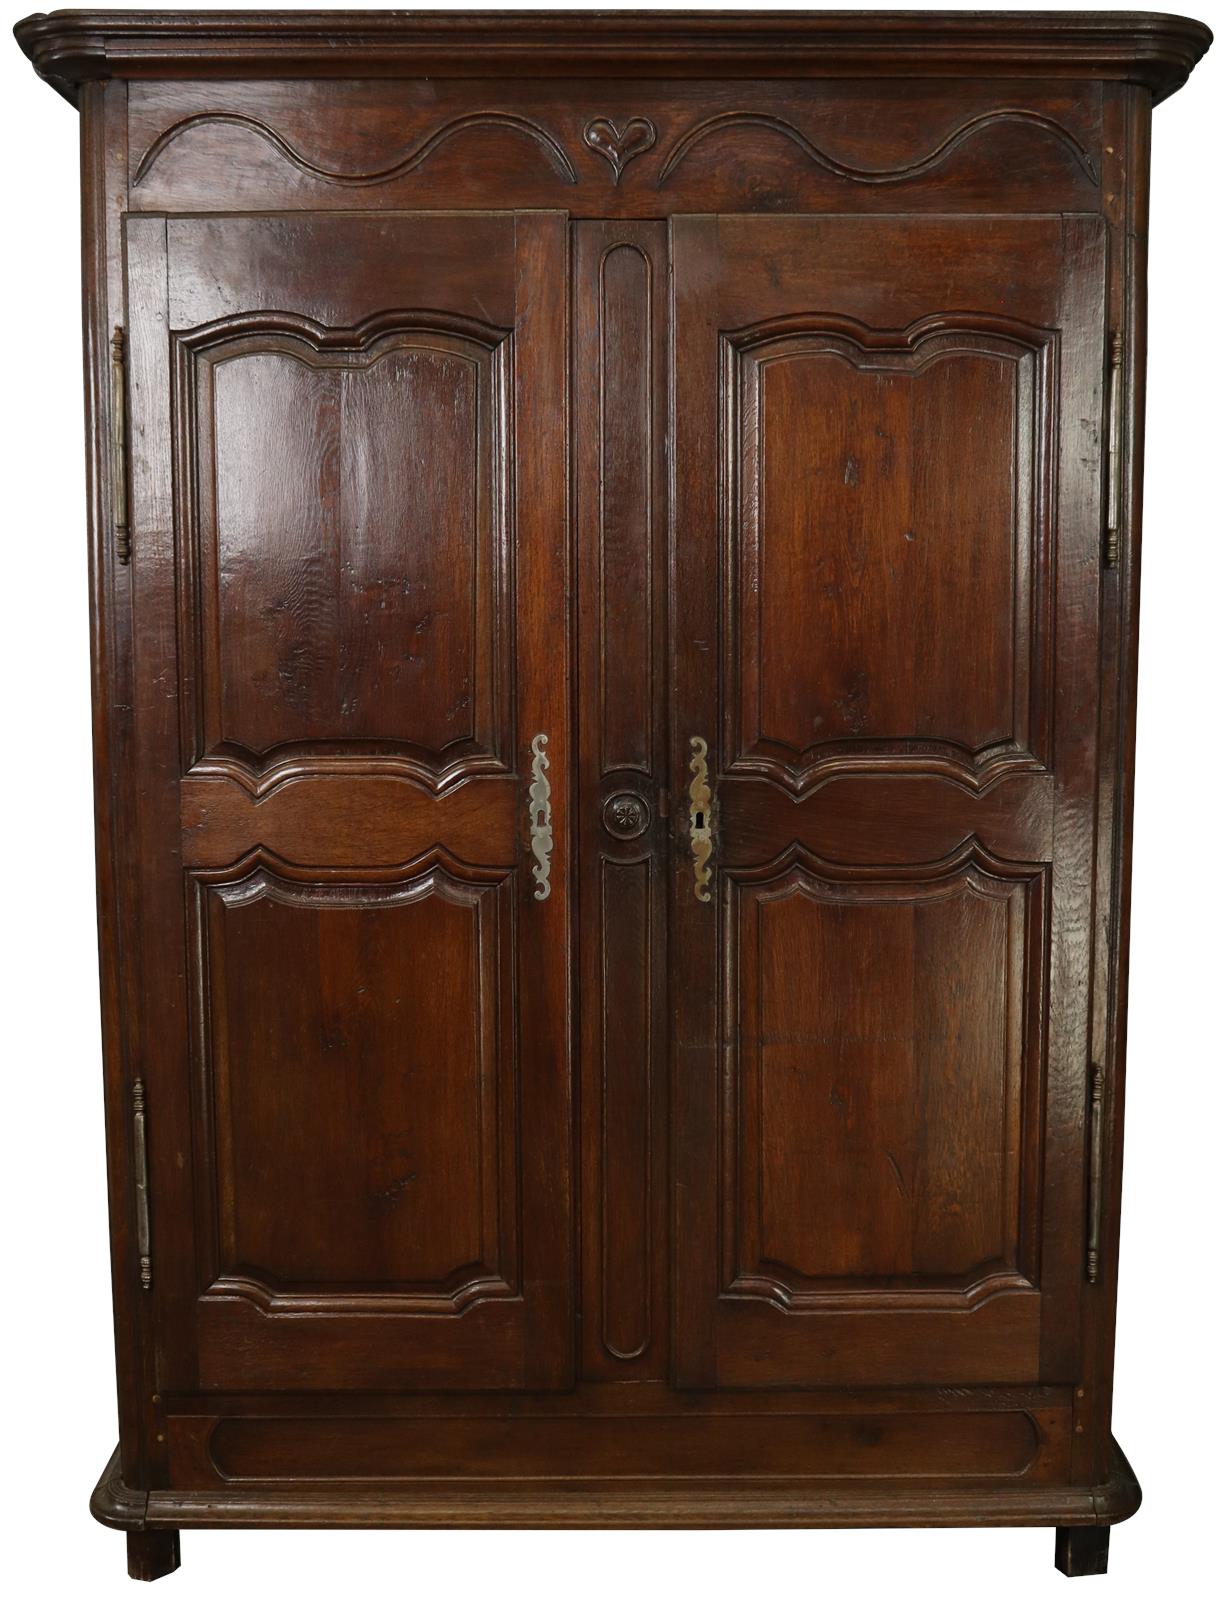 Armoire Antique French Provincial Very Old 1790 Oak Wood Peg Construction Heart -Image 2